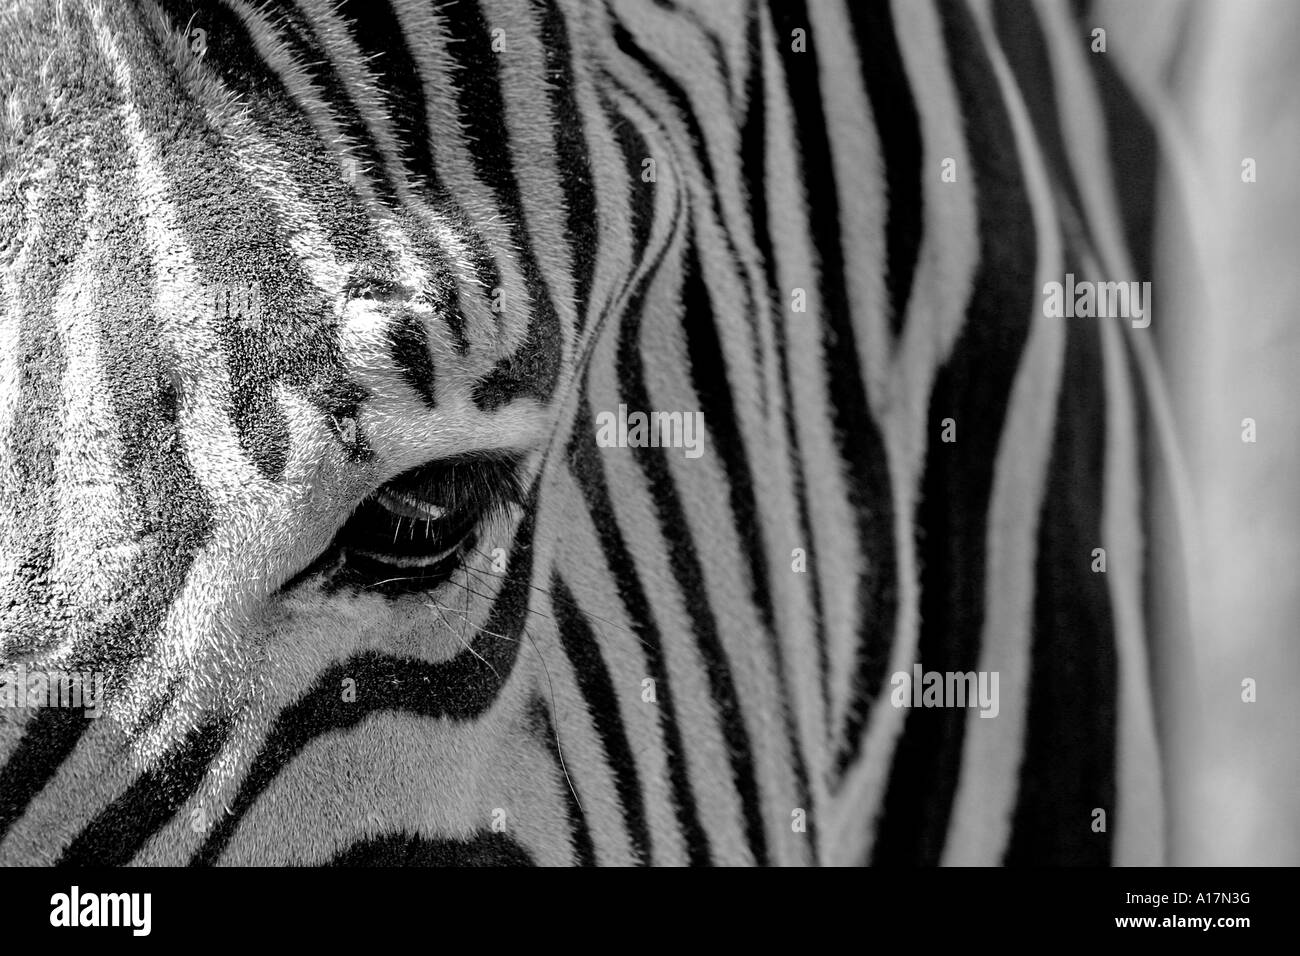 The detail of a Zebra's pattern. Stock Photo